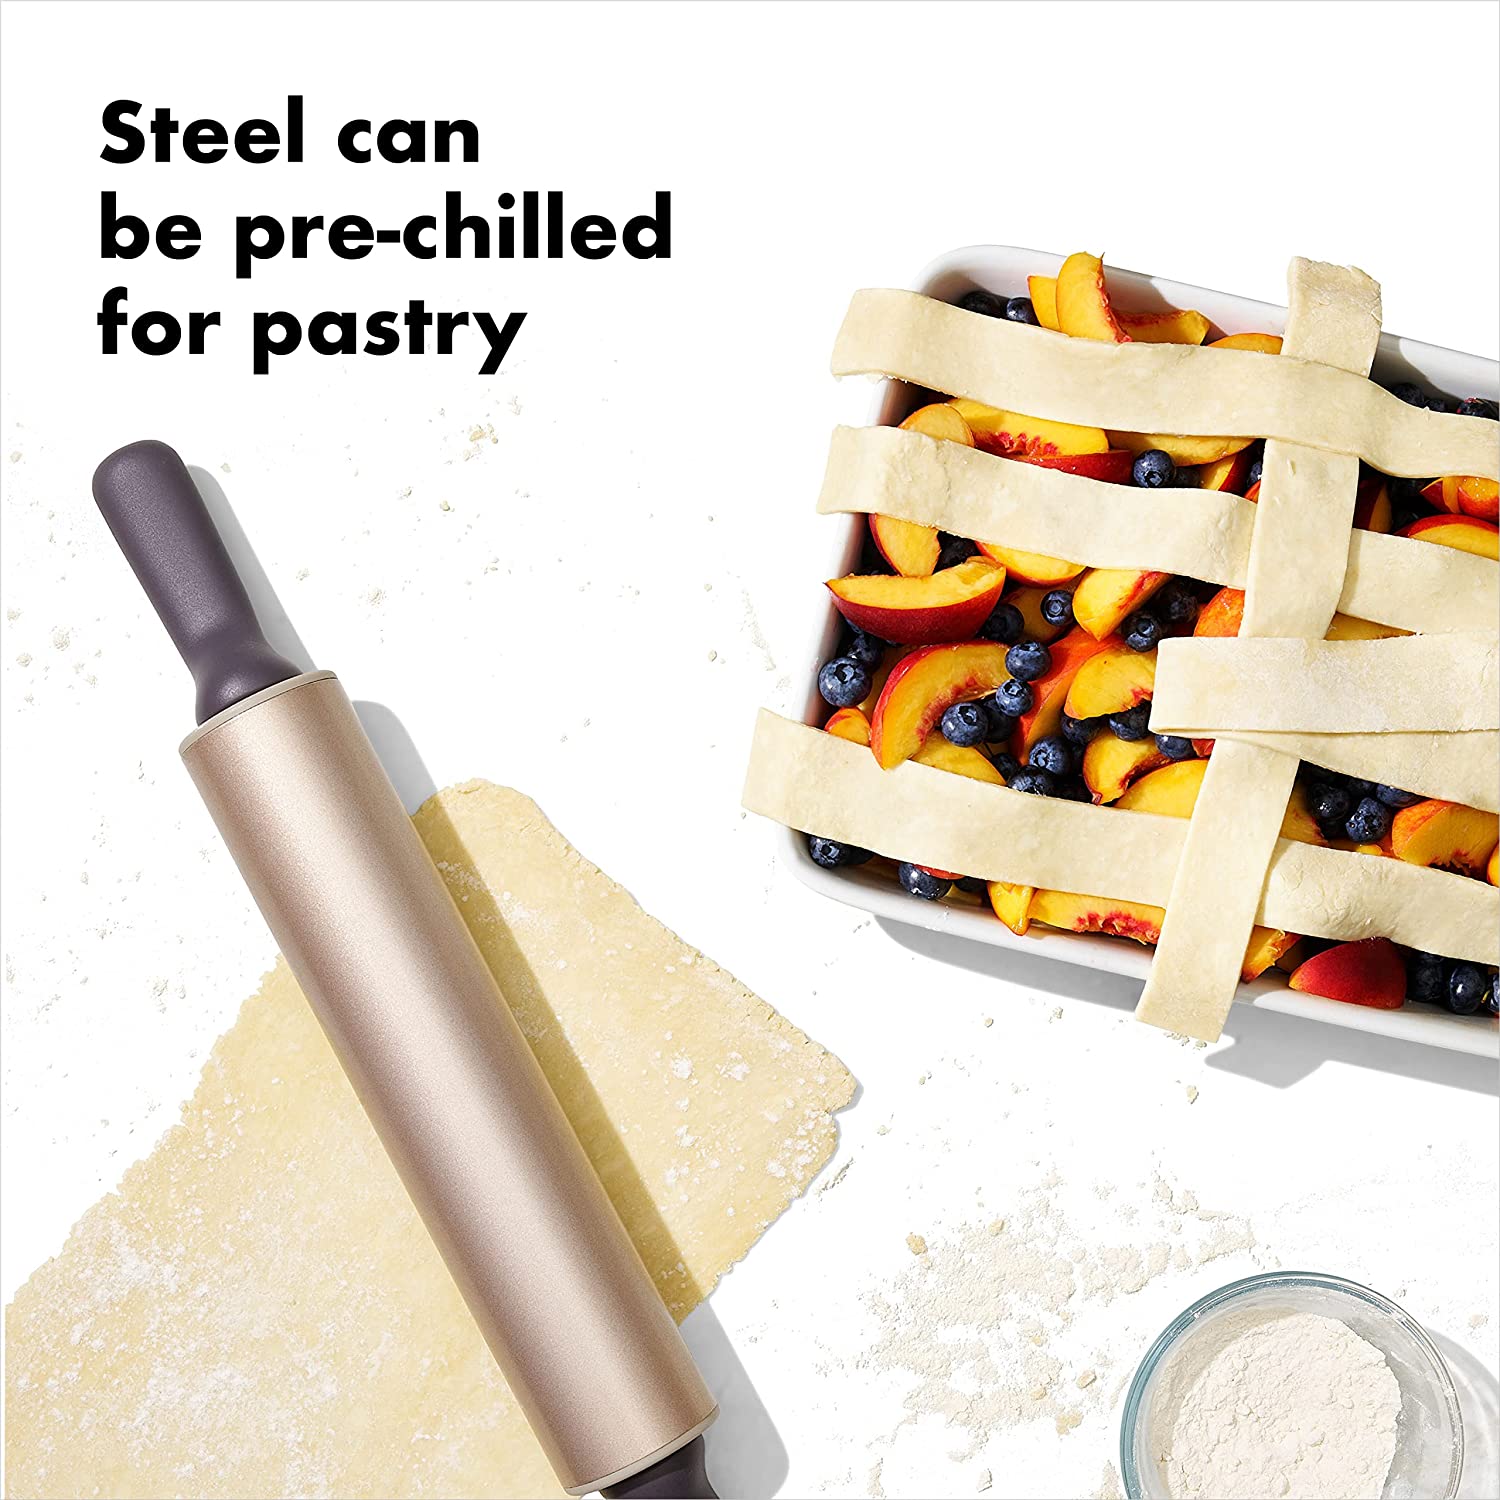 OXO Good Grips Non-stick Rolling Pin